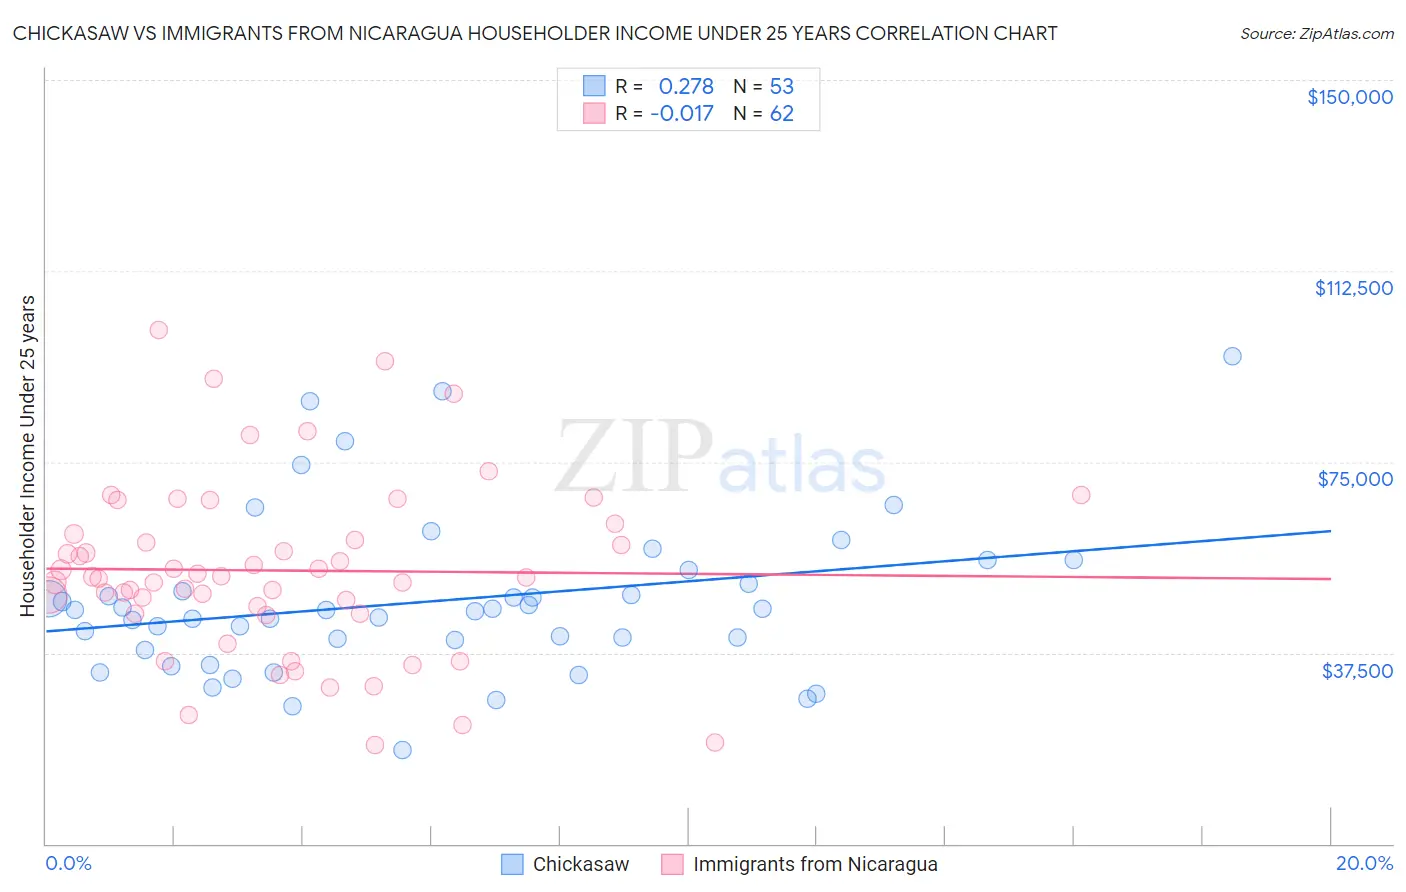 Chickasaw vs Immigrants from Nicaragua Householder Income Under 25 years